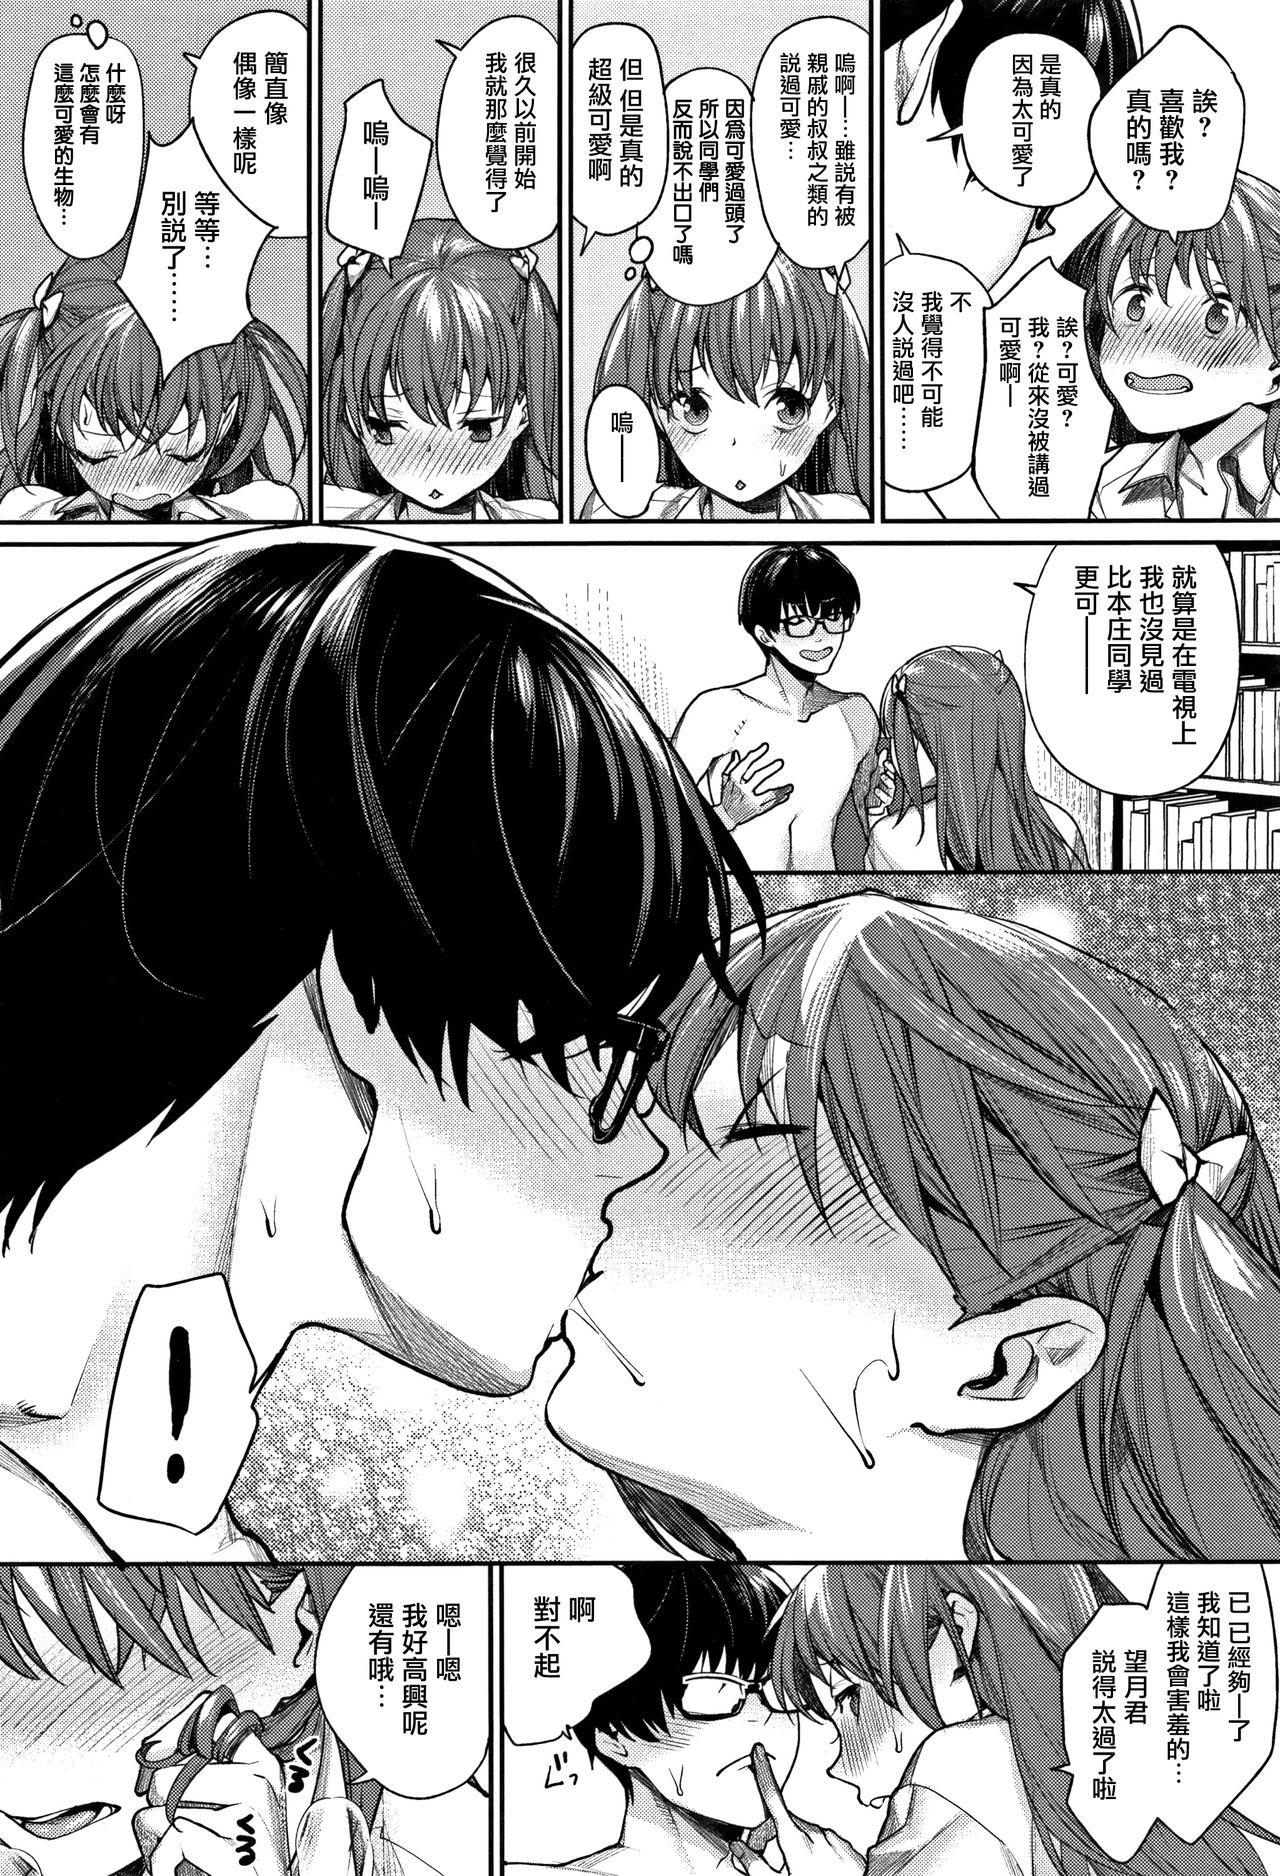 Brazzers [MGMEE] Bokura no Etude - Our H Chu Do Ch.1-4 [Chinese] [無邪気漢化組] Chubby - Page 12